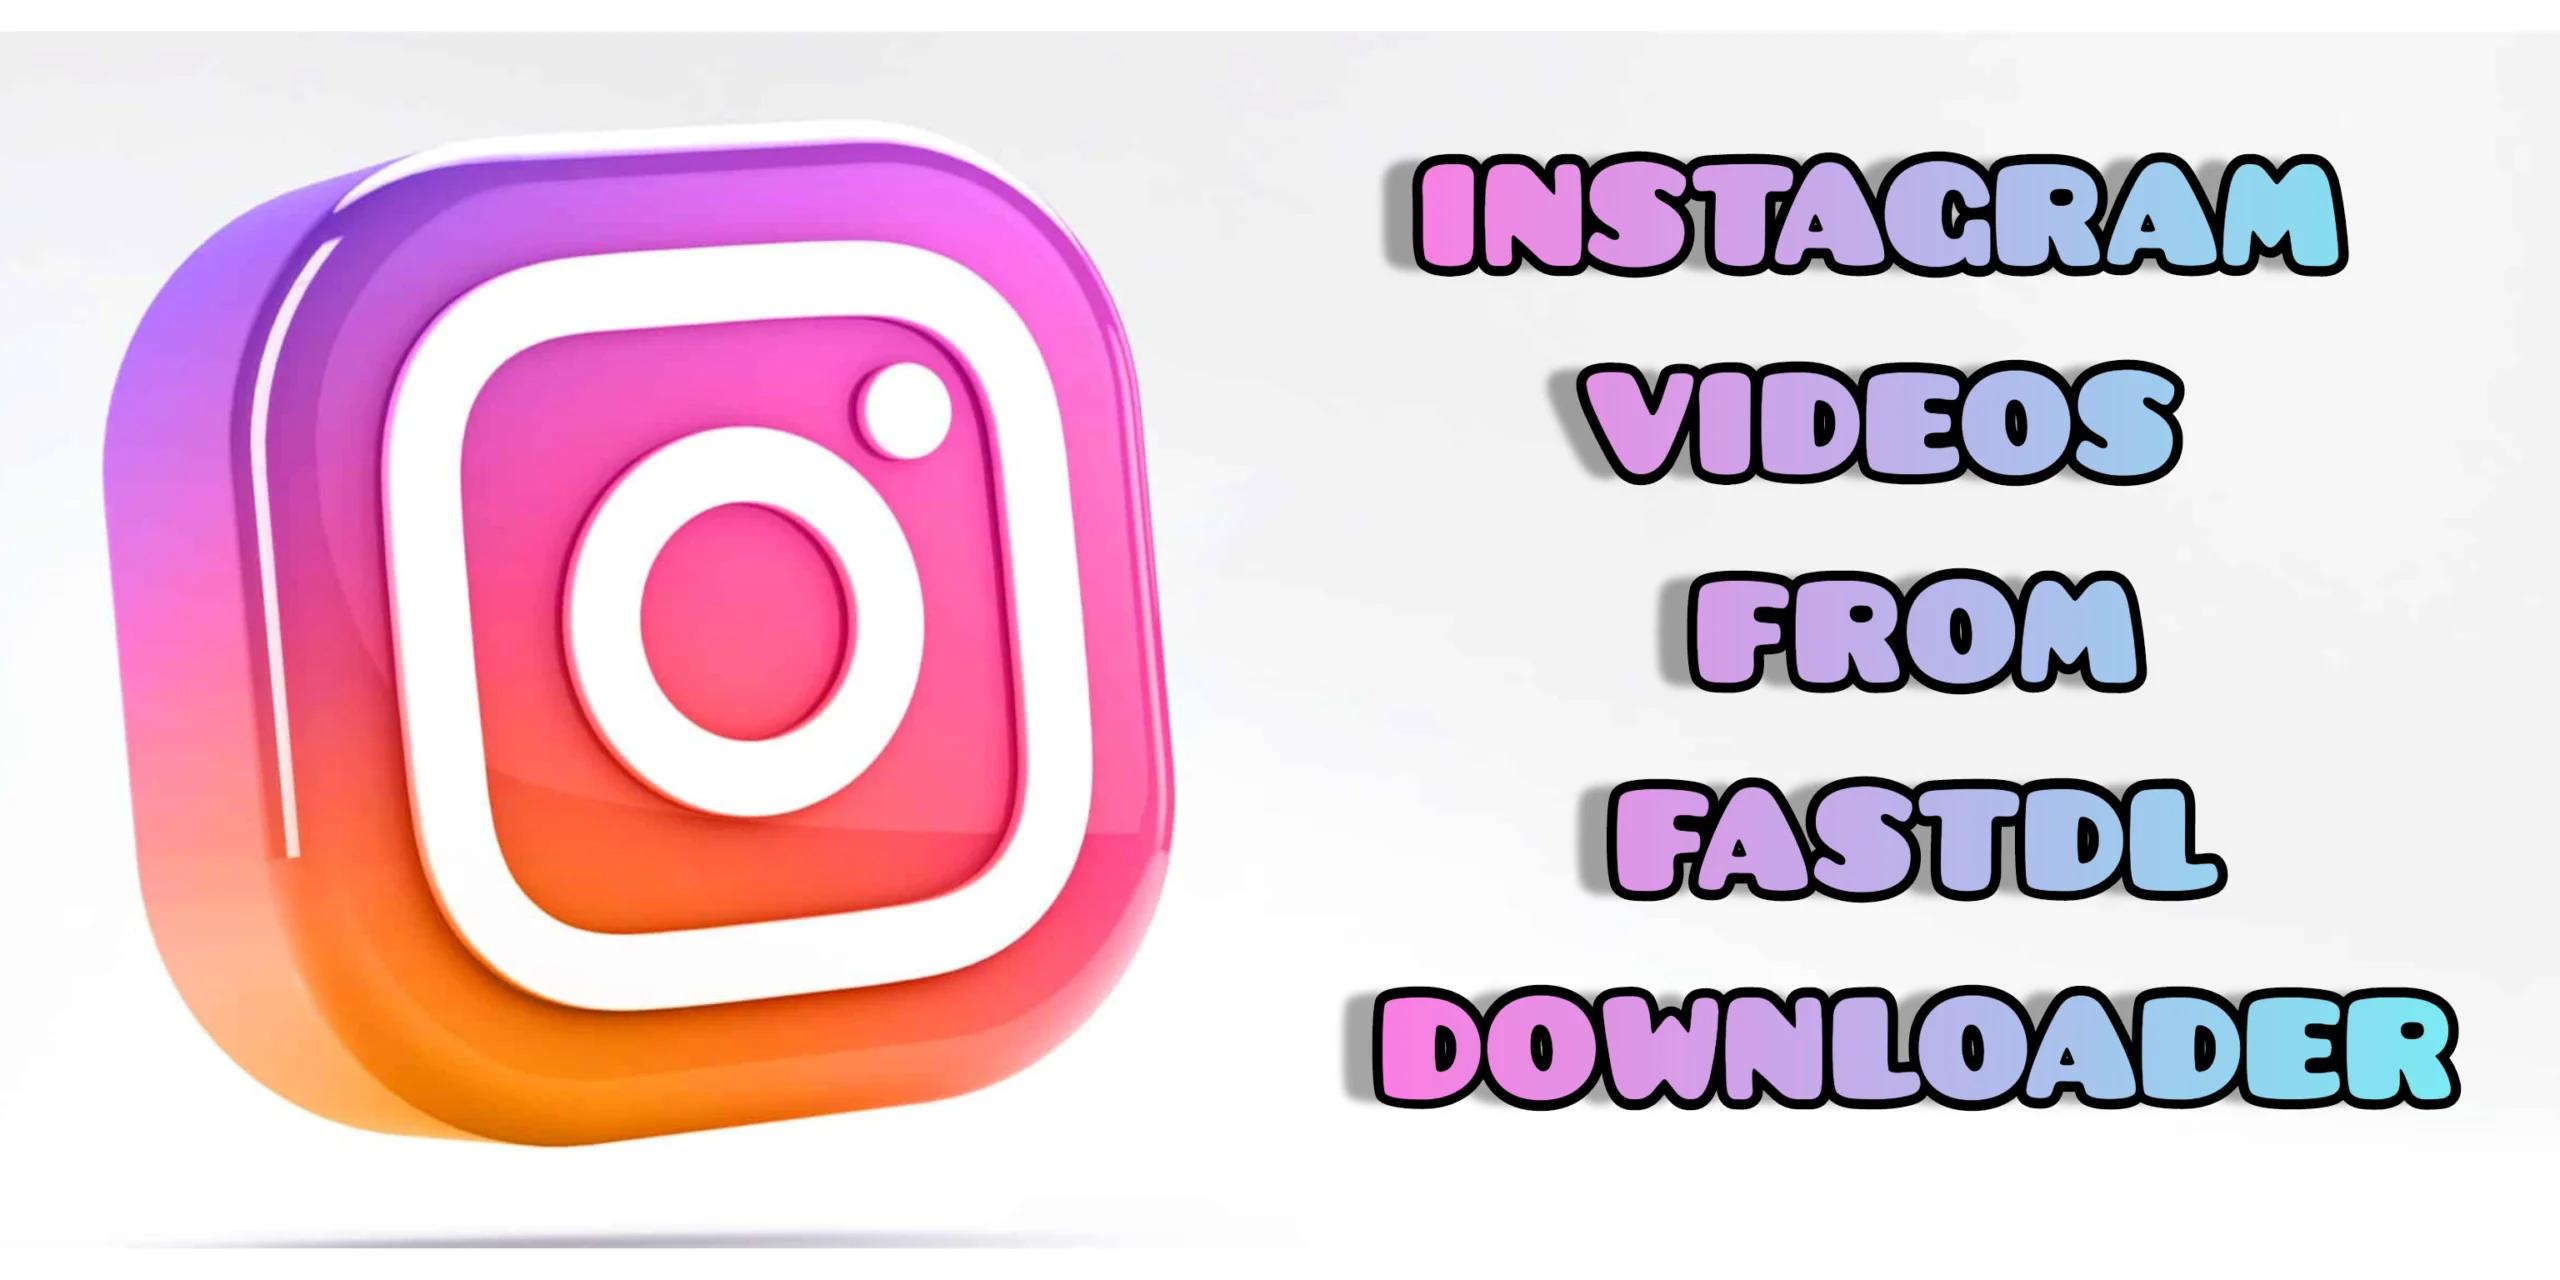 How To Download Videos From Instagram With The Help of FastDL Downloader